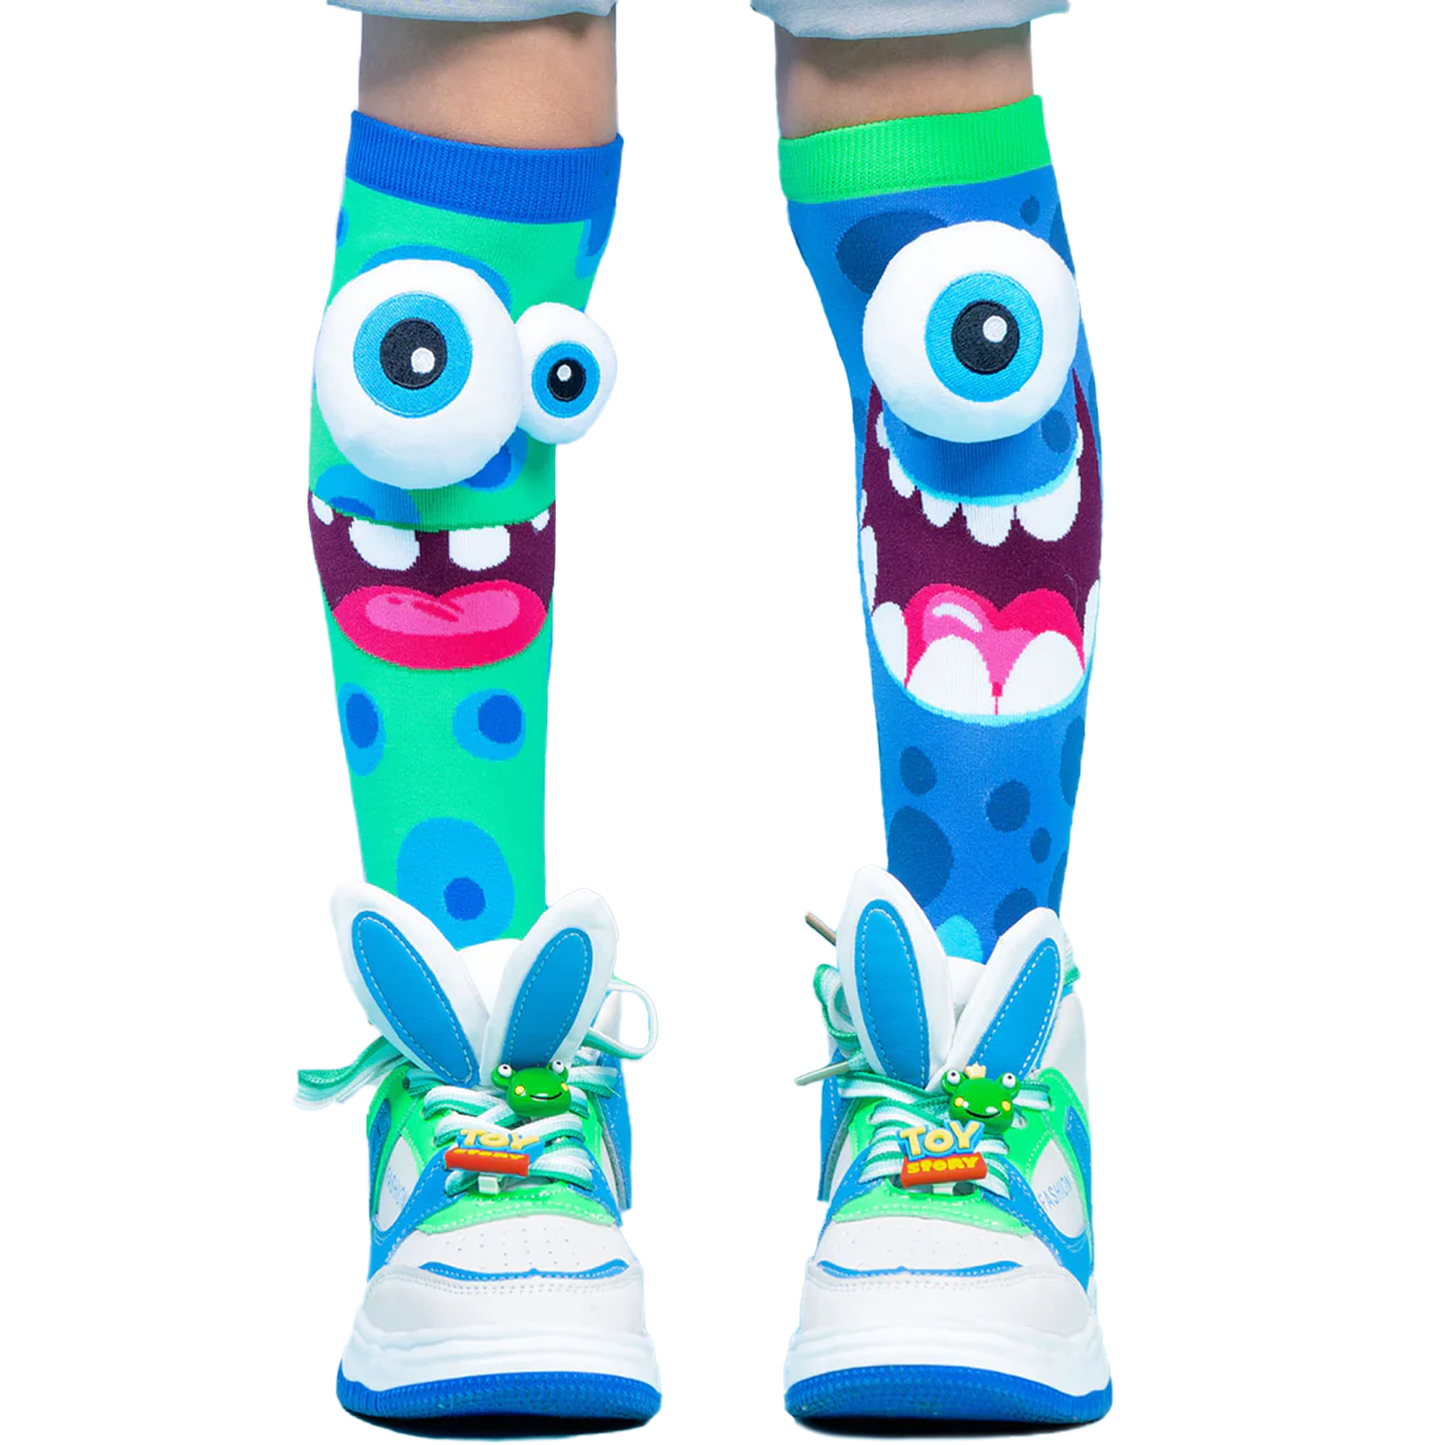 SILLY MONSTERS SOCKS